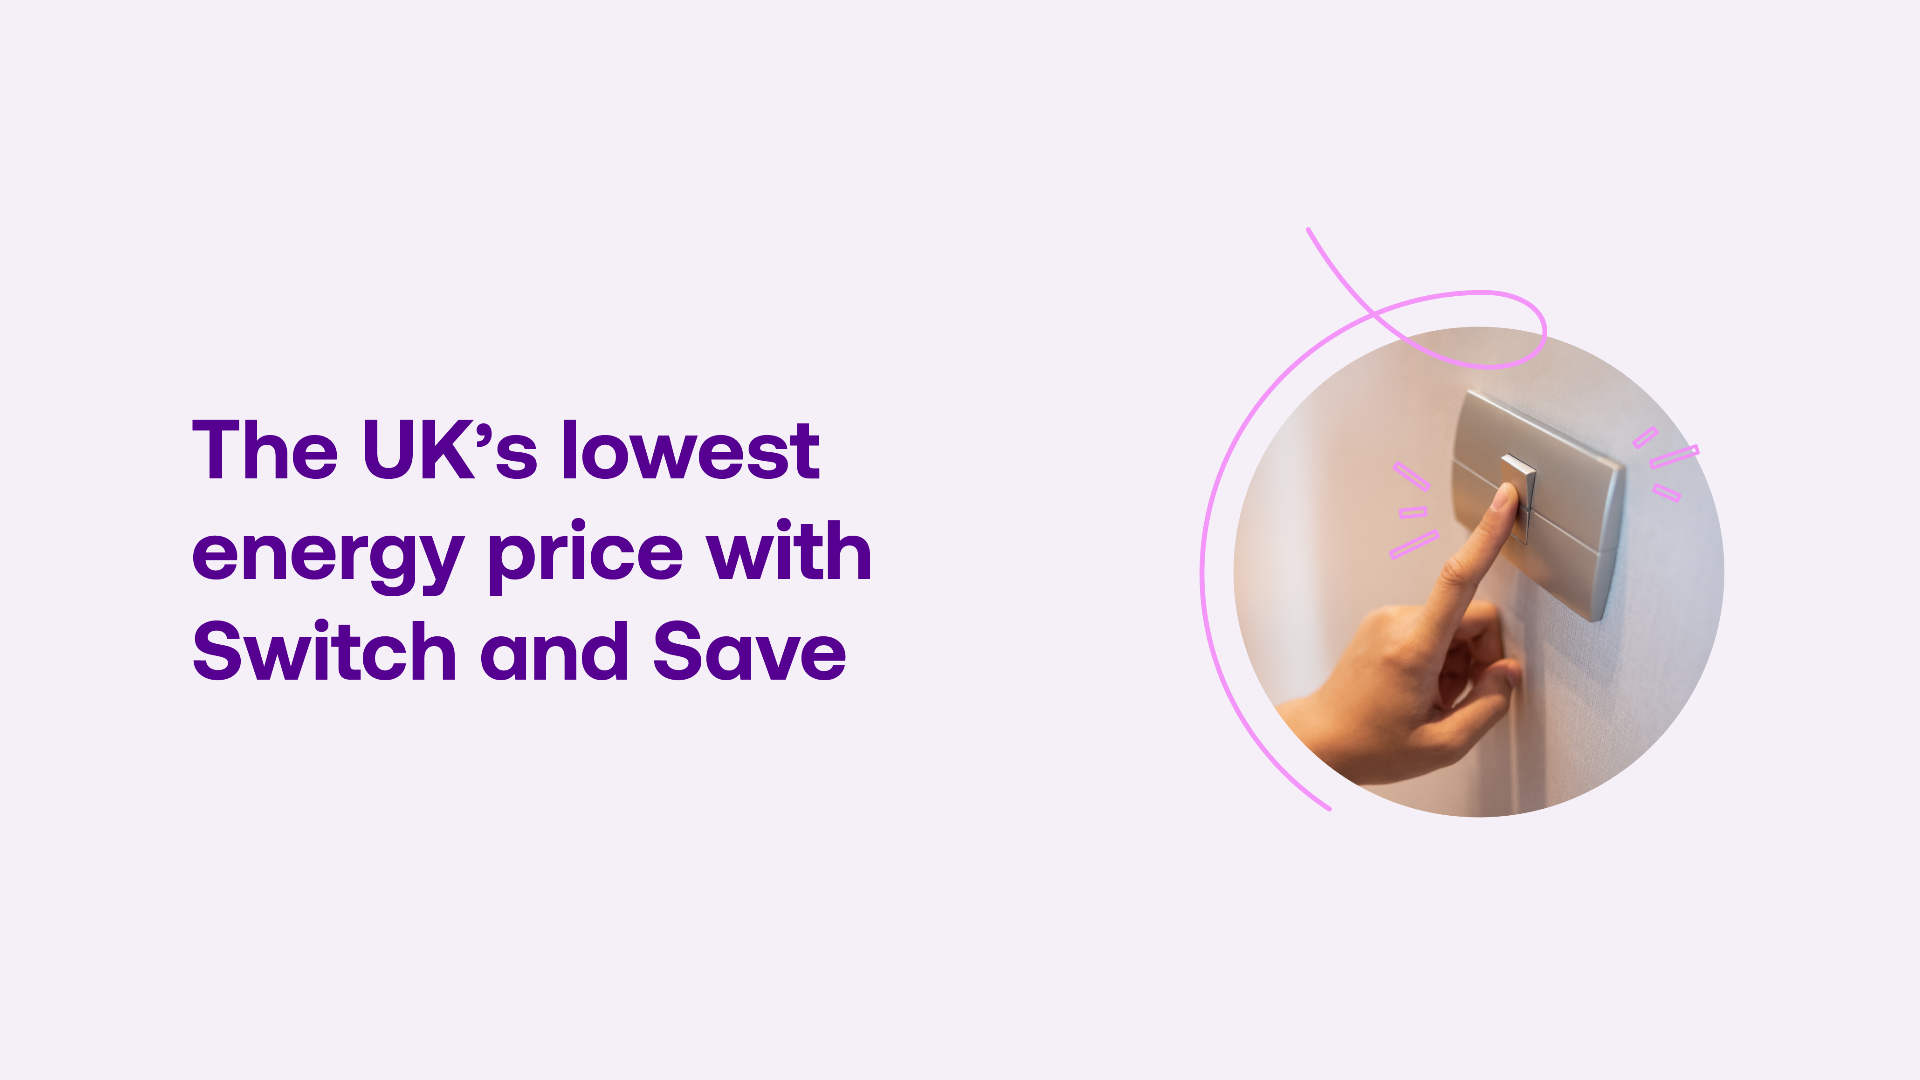 UW offering the UK's lowest energy price with Switch and Save 070121